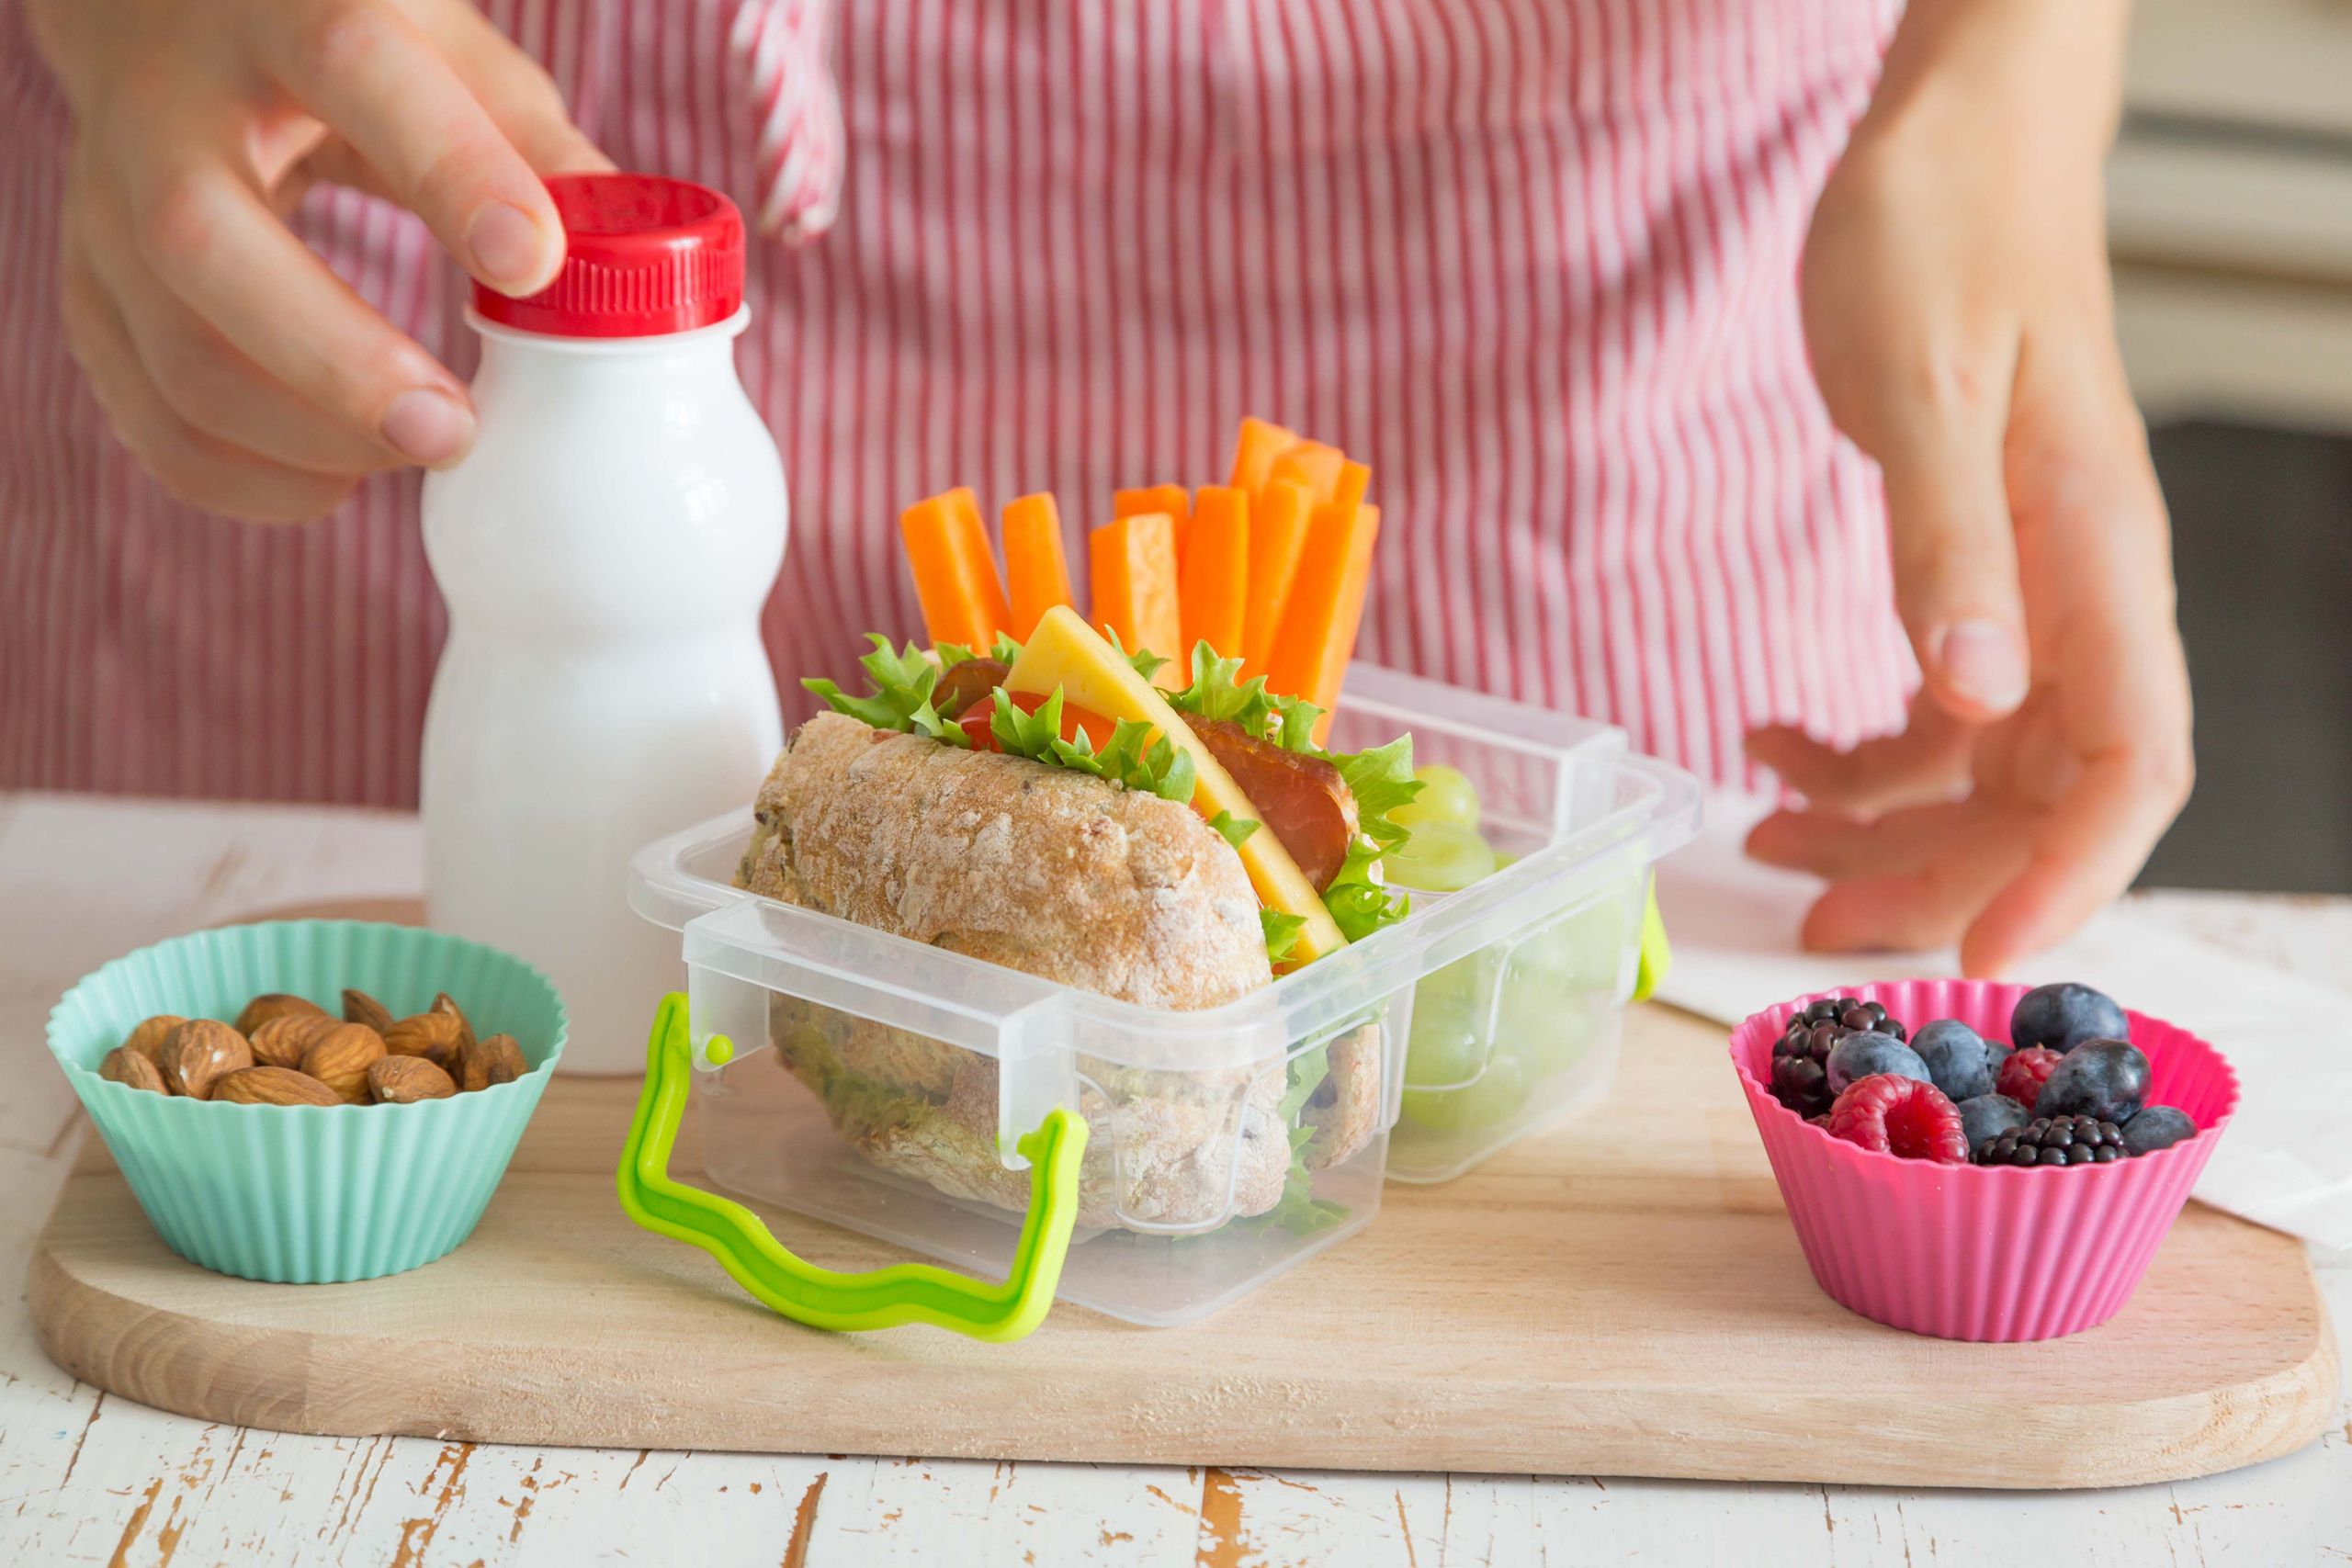 Healthy Packed Lunches For Kids
 Healthy Drink Can Pack a Punch in Preschooler’s Lunch